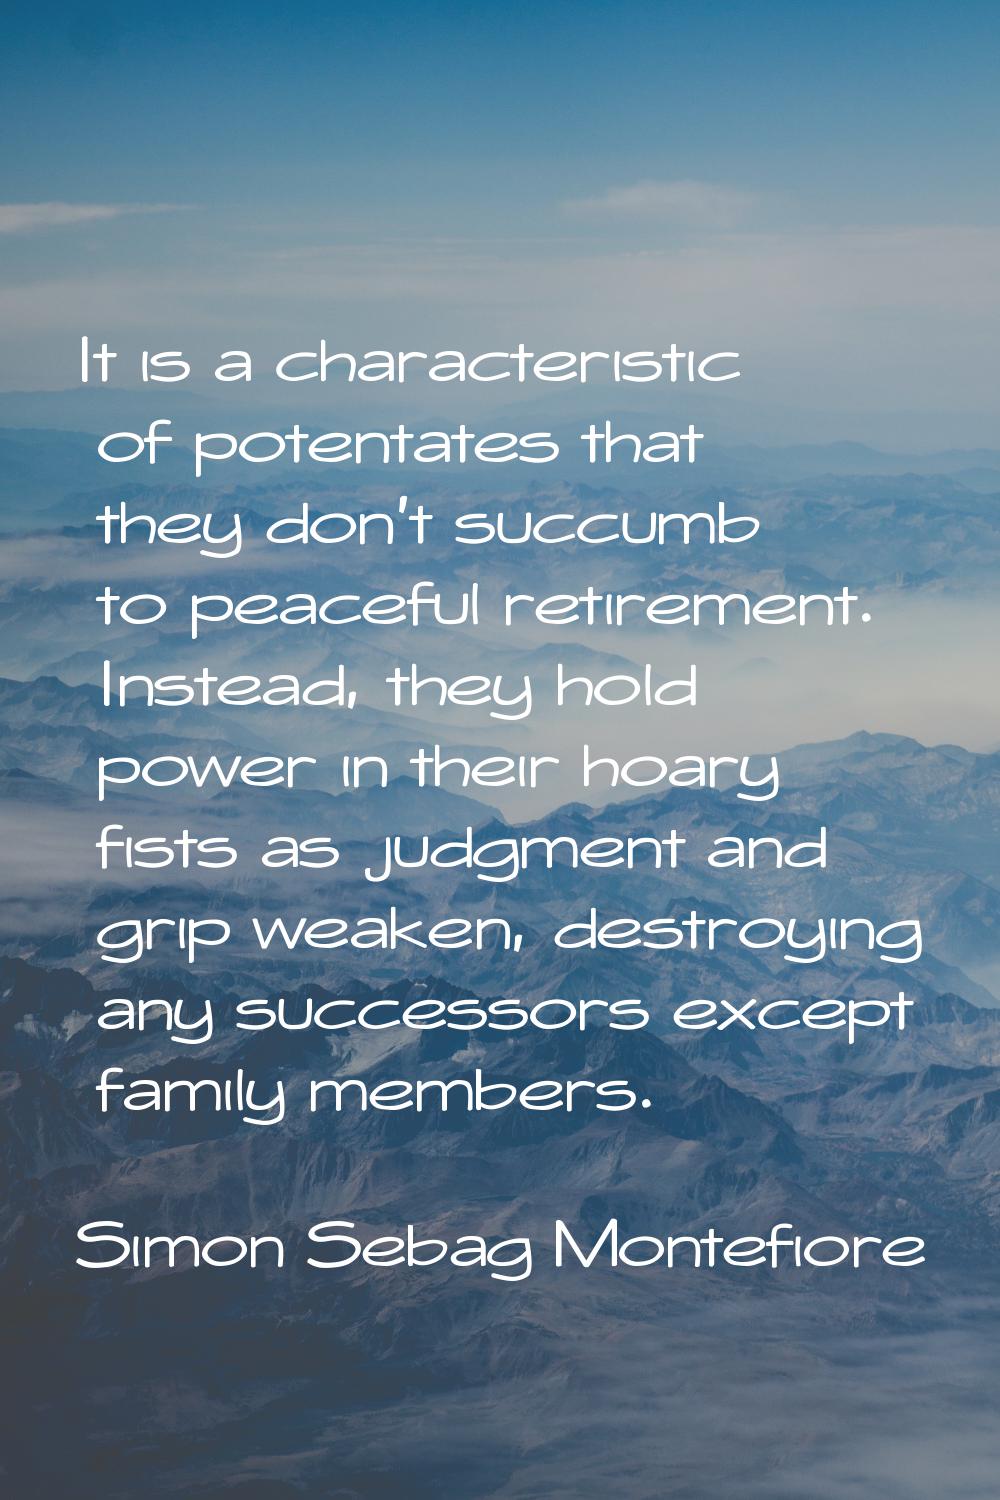 It is a characteristic of potentates that they don't succumb to peaceful retirement. Instead, they 